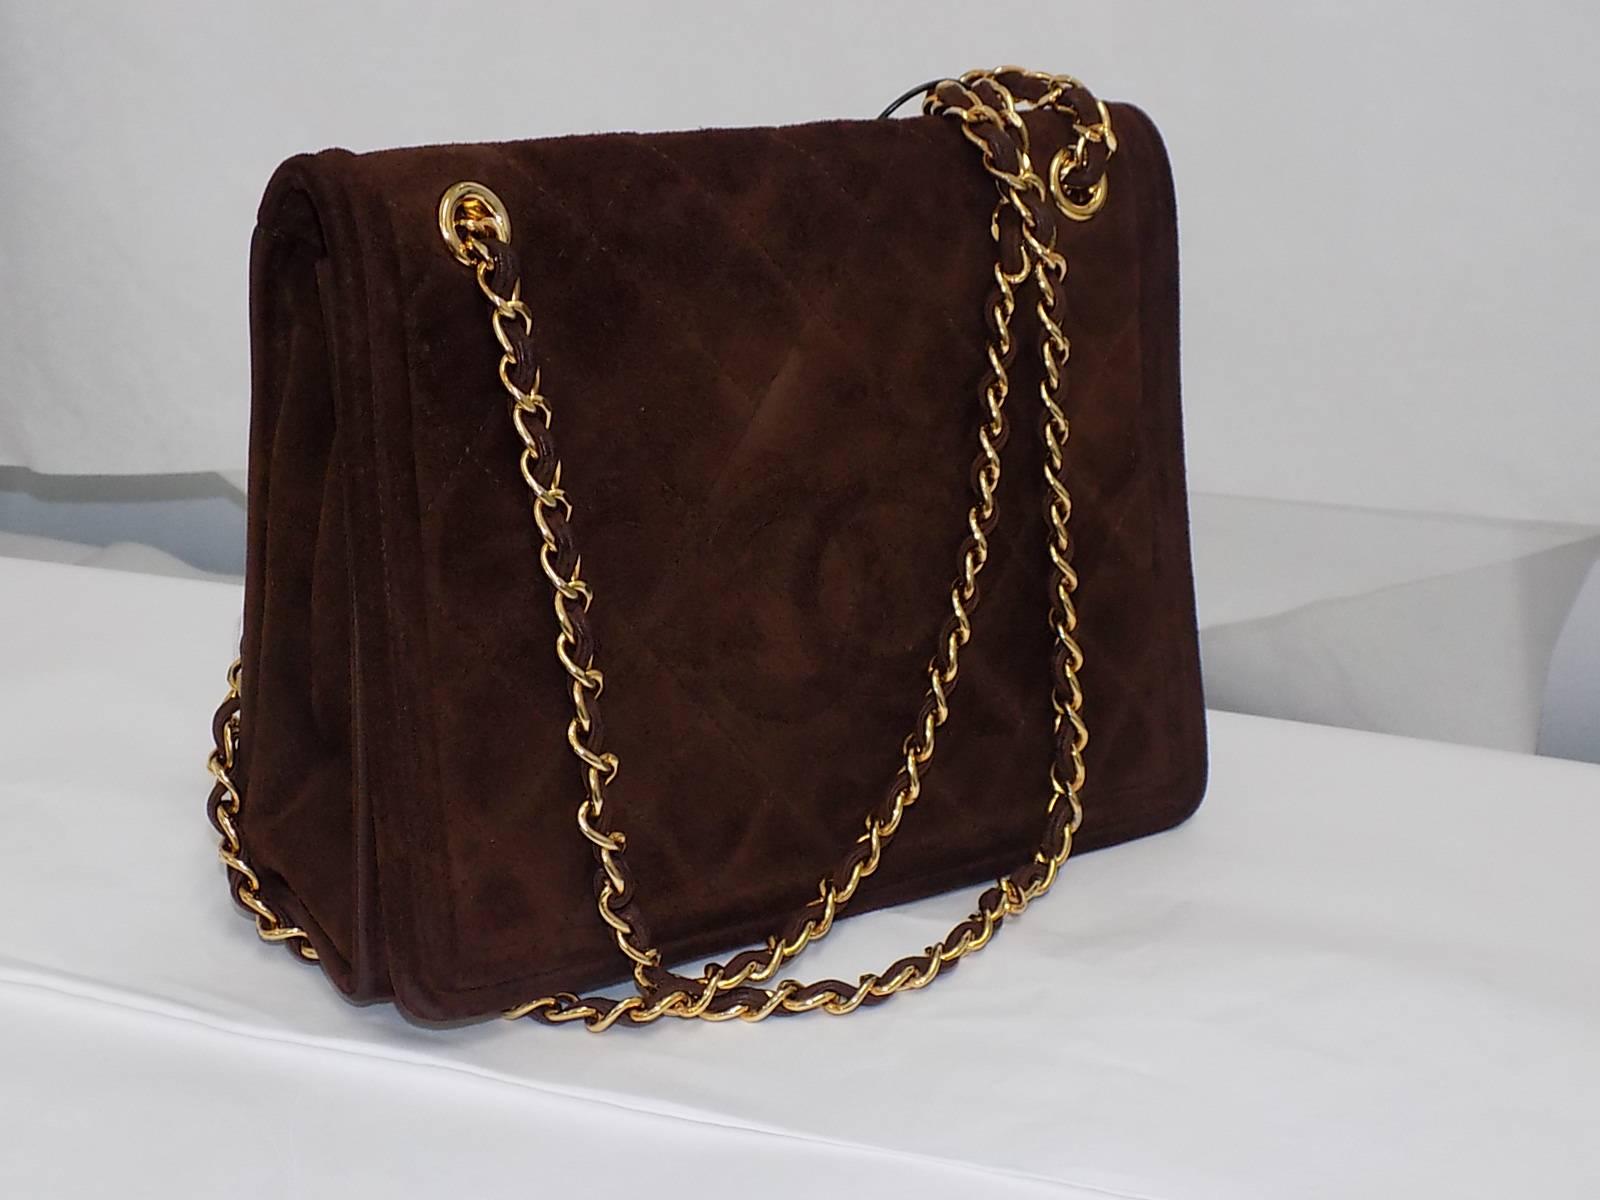 Chanel quilted suede brown suede flap bag  In Good Condition For Sale In New York, NY